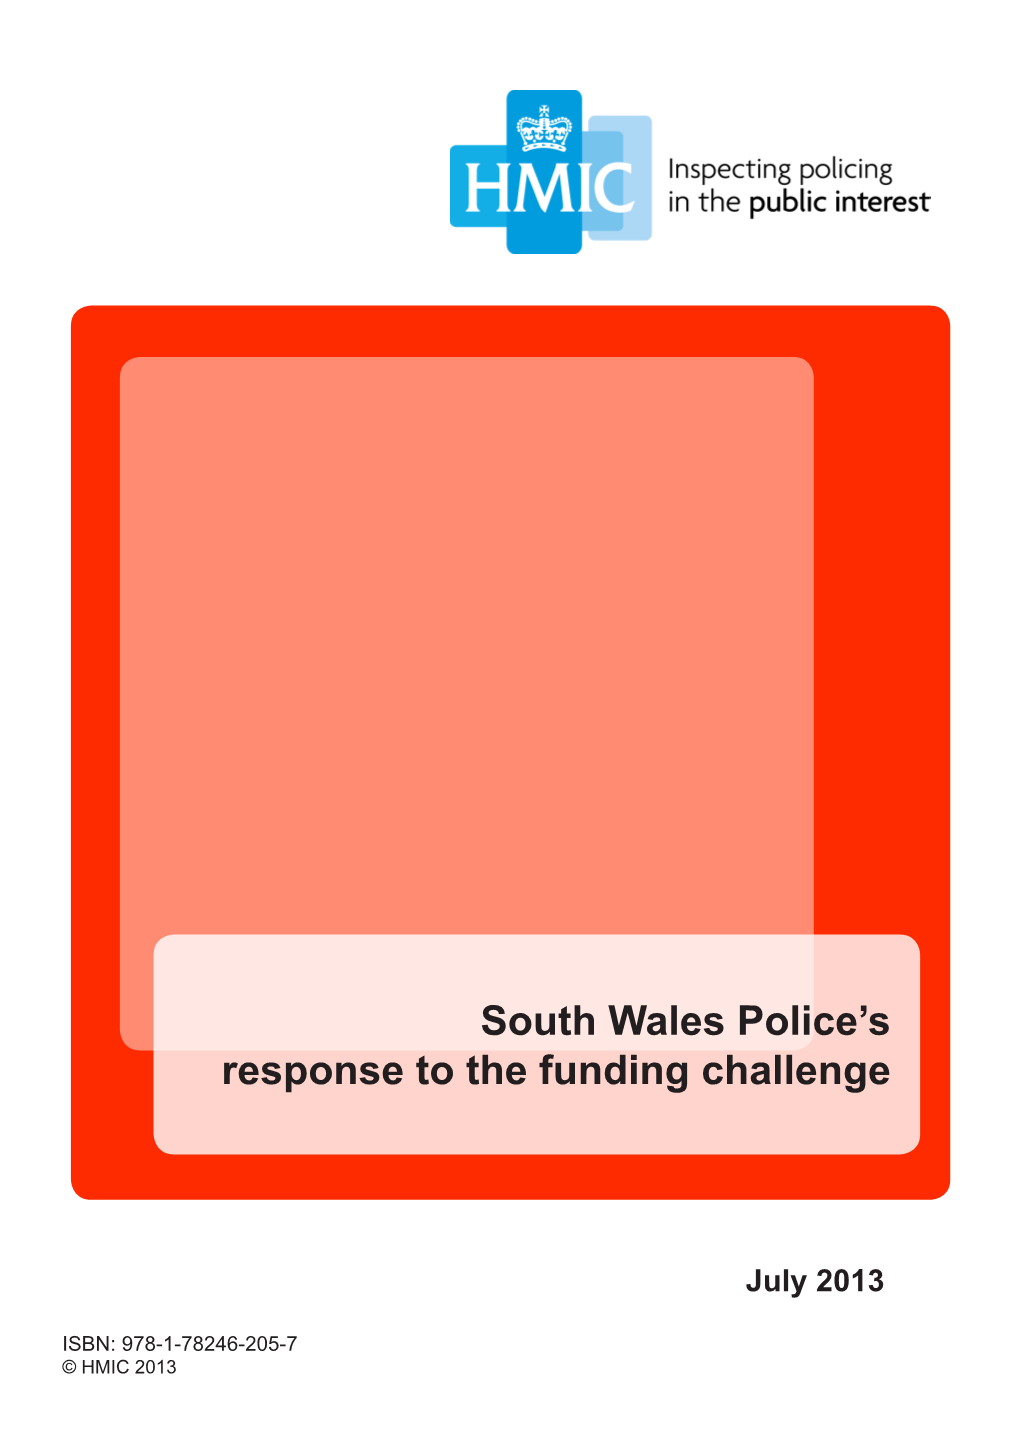 South Wales Police's Response to the Funding Challenge